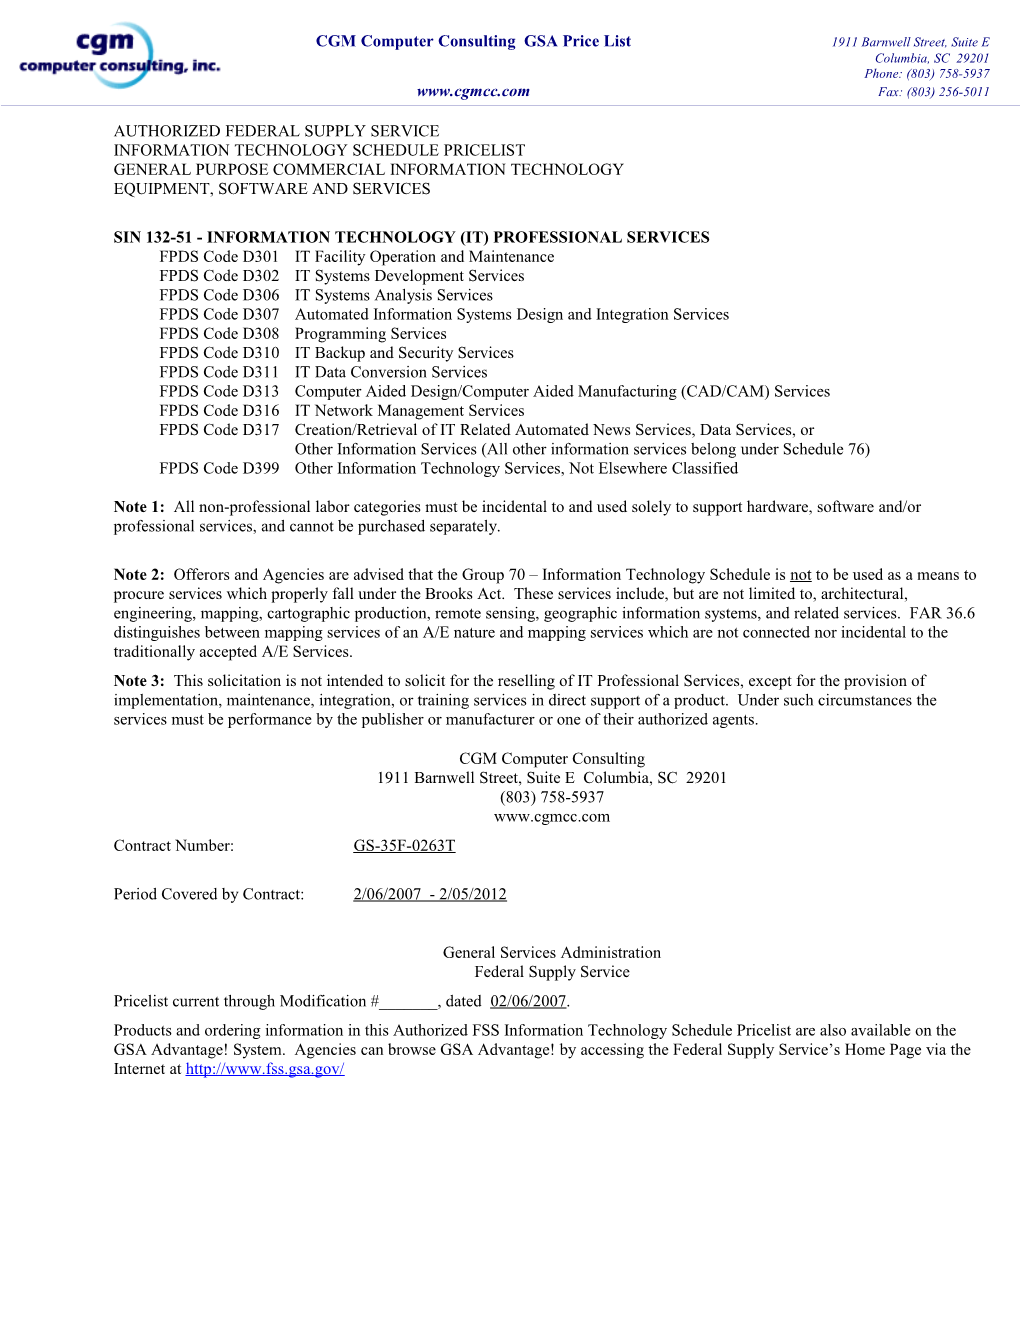 CGM Computer Consulting GSA Price List PAGE 6 of 20 PAGES